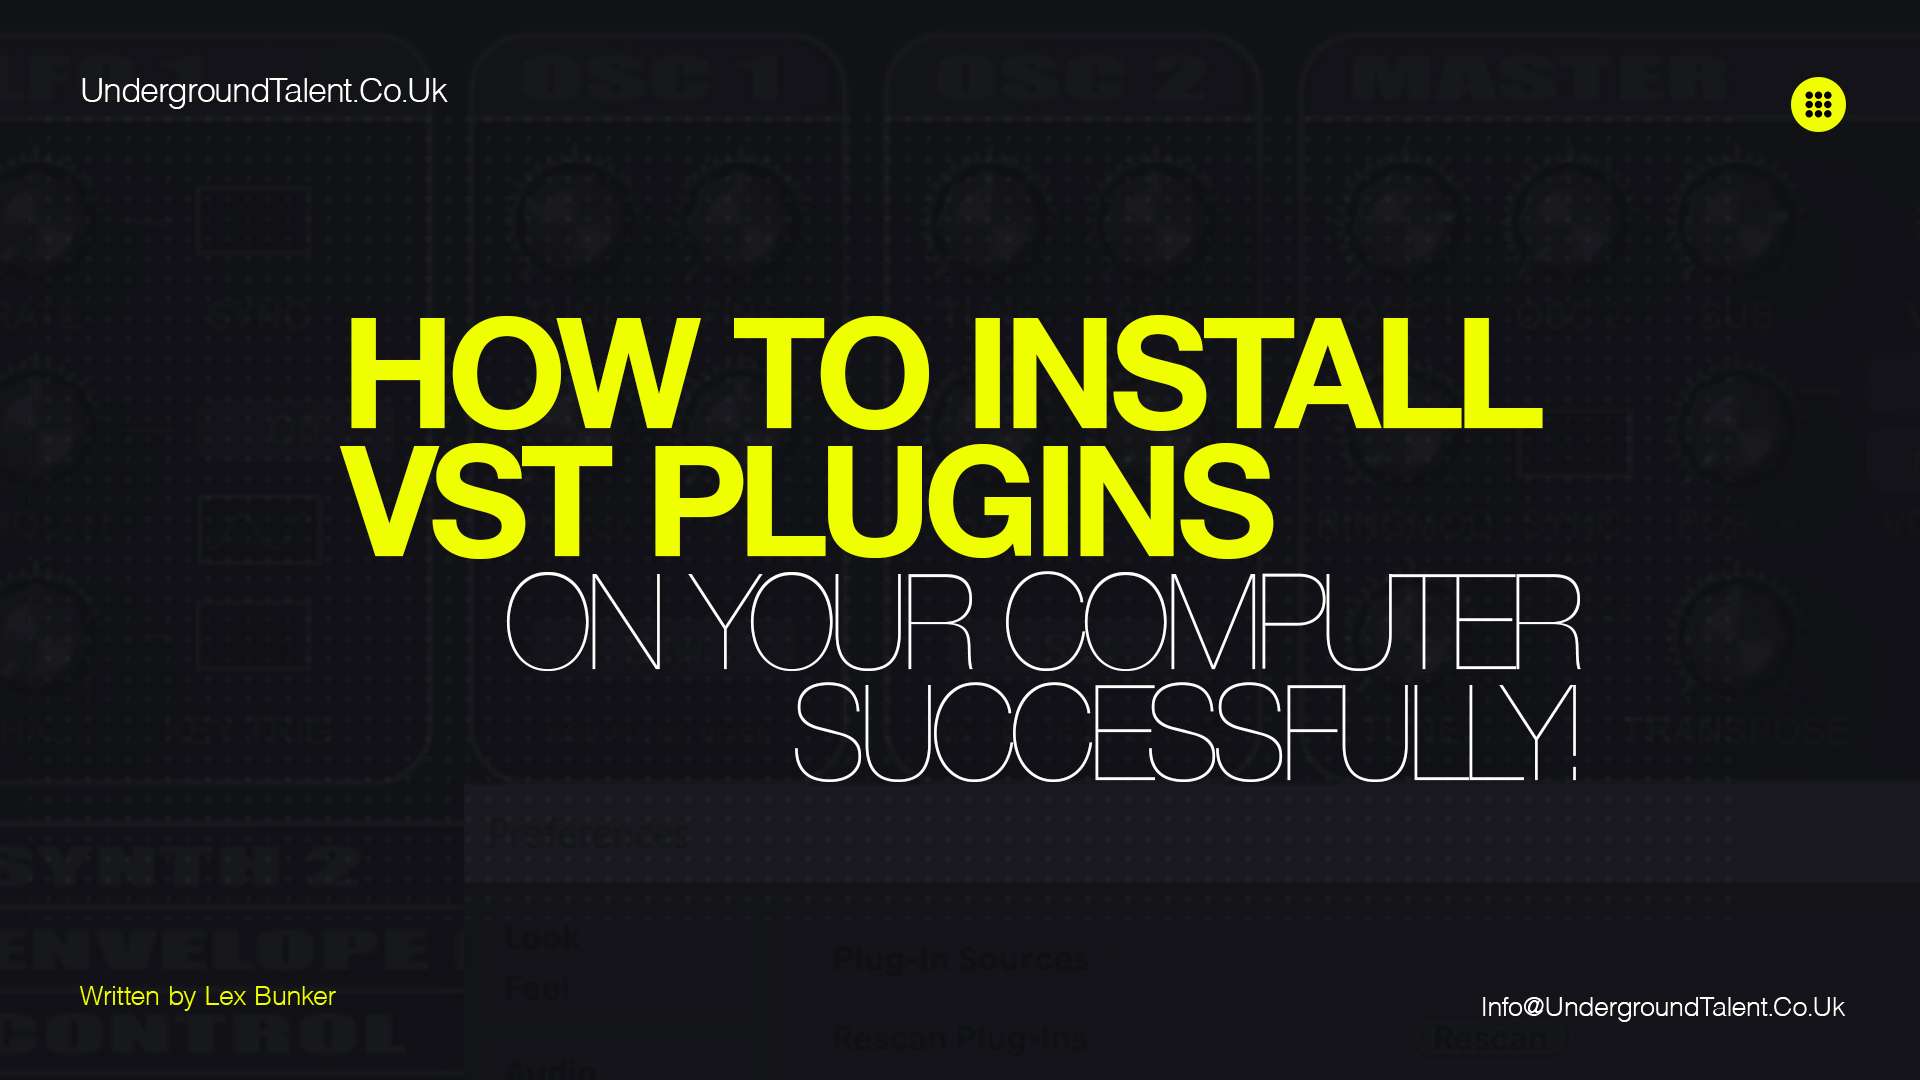 How to Install VST Plugins on Your Computer Successfully